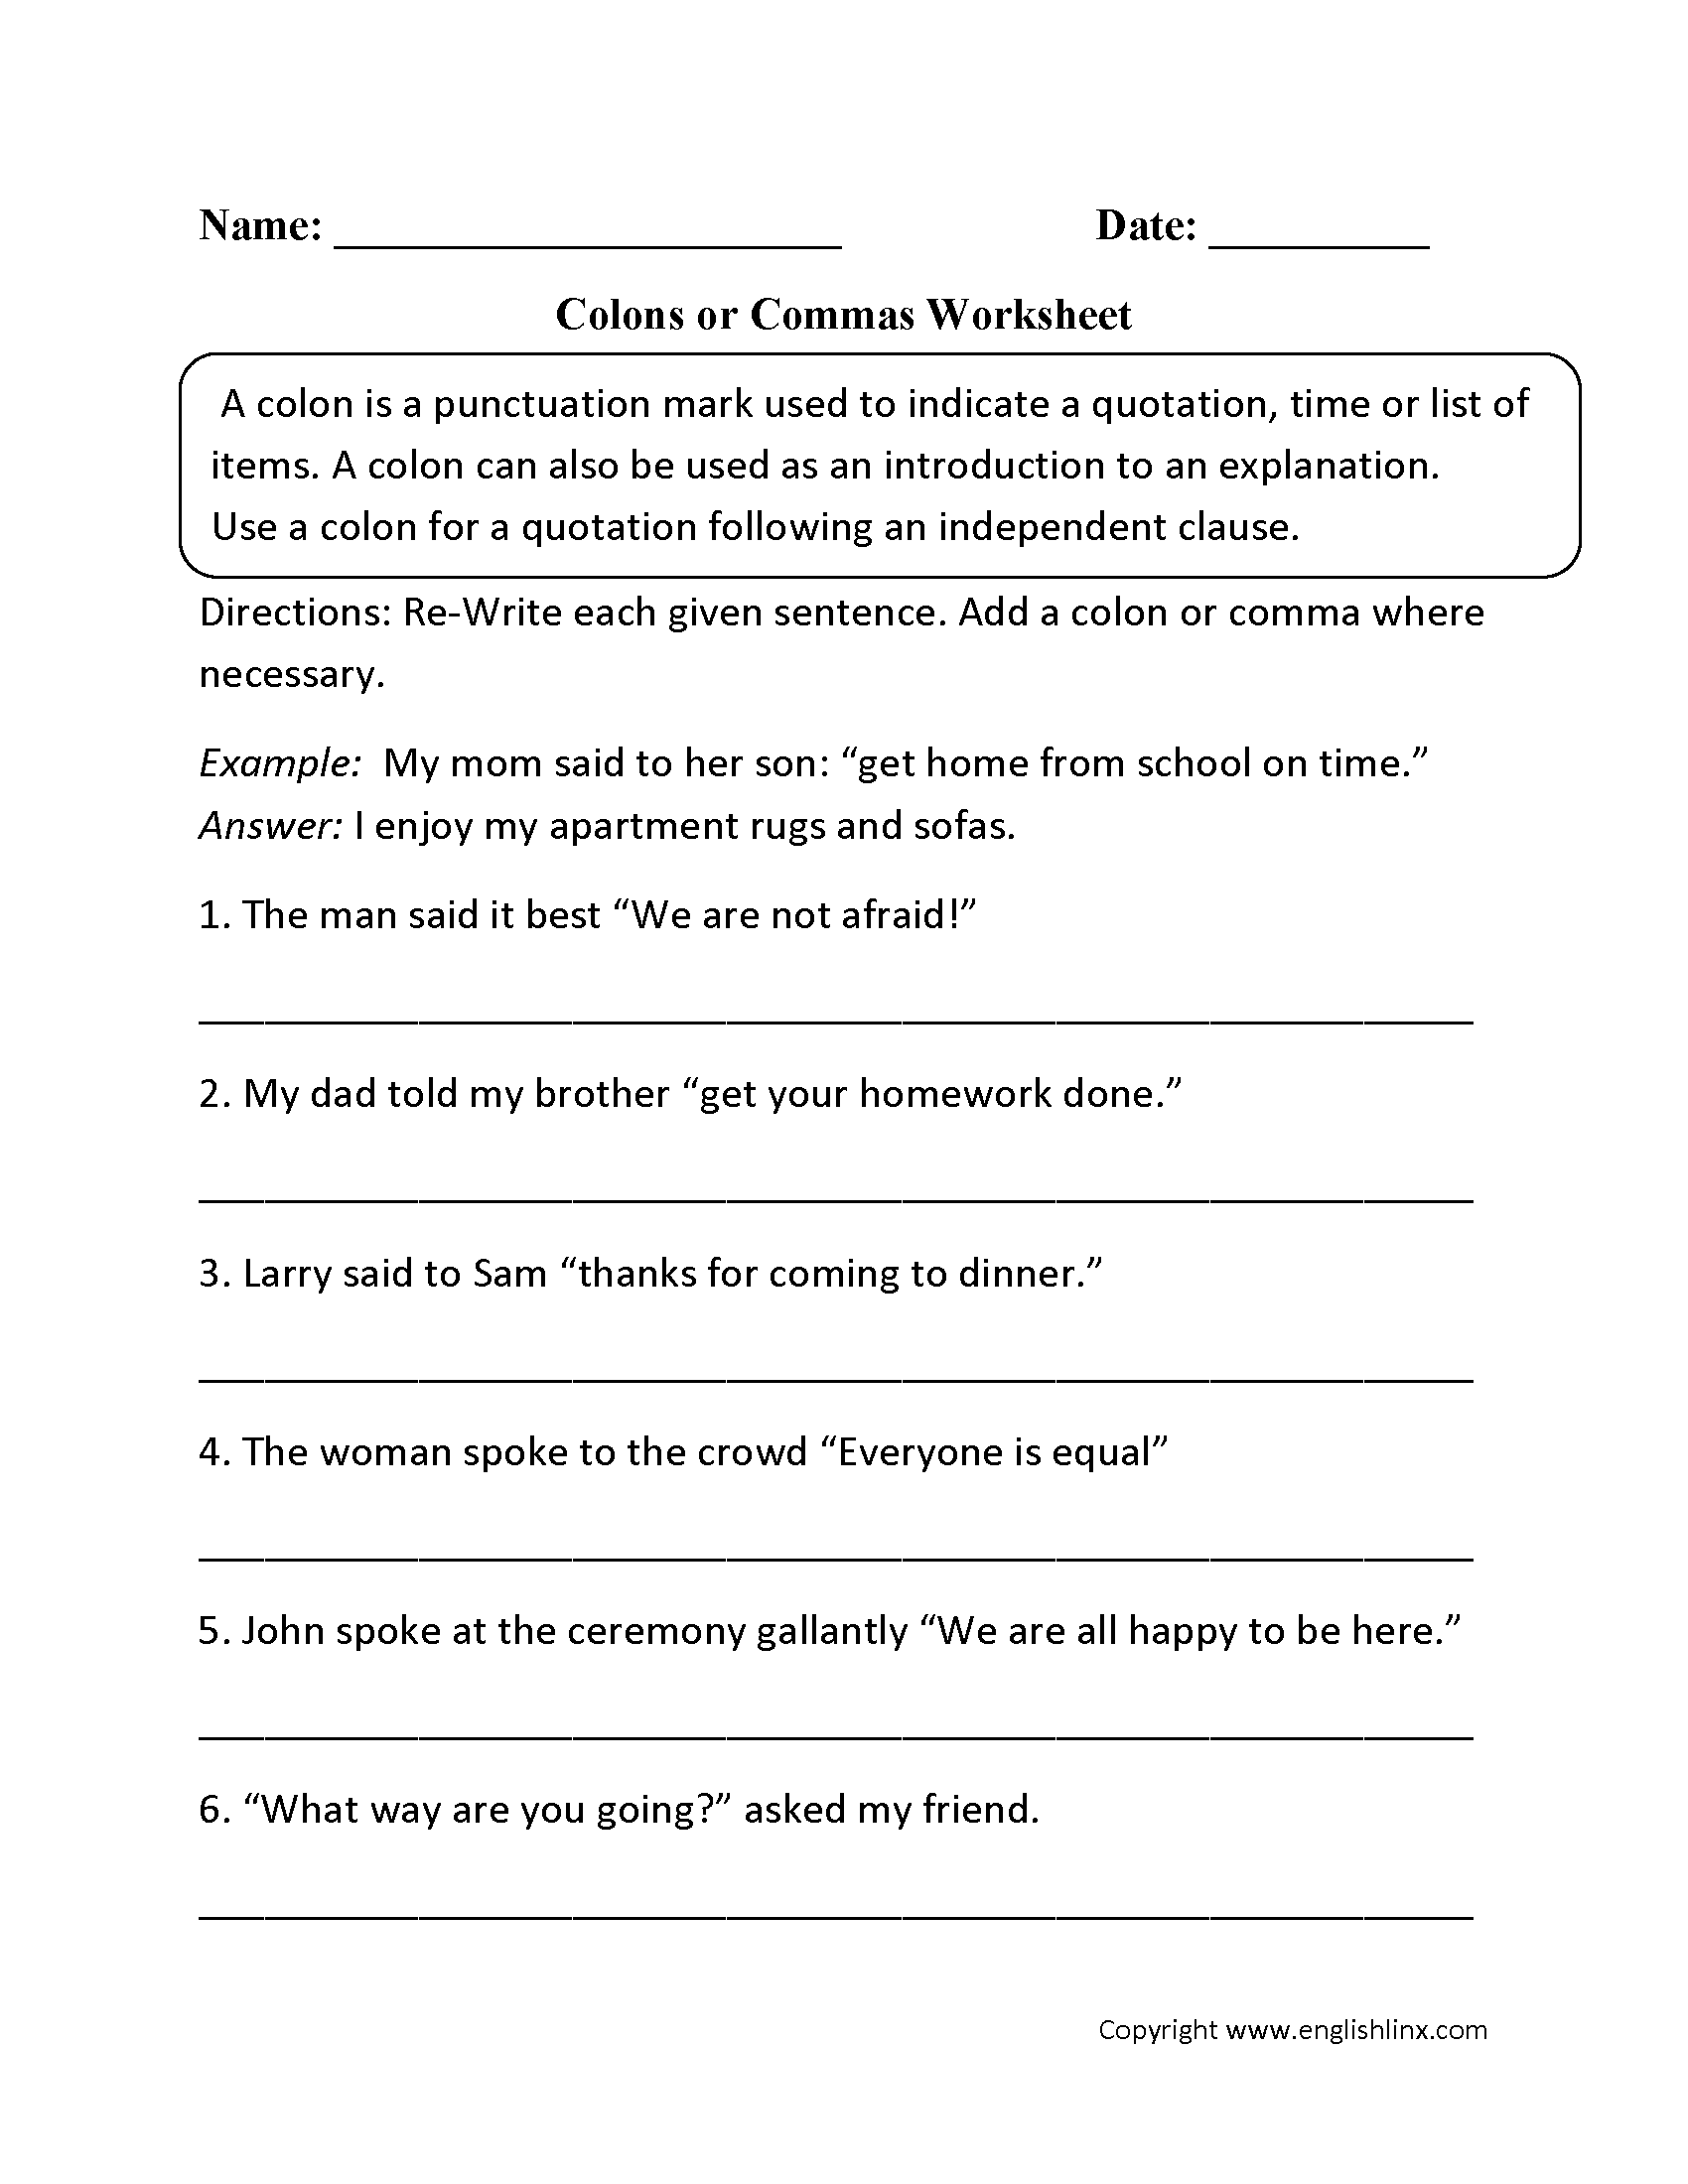 Colon or Comma Worksheets